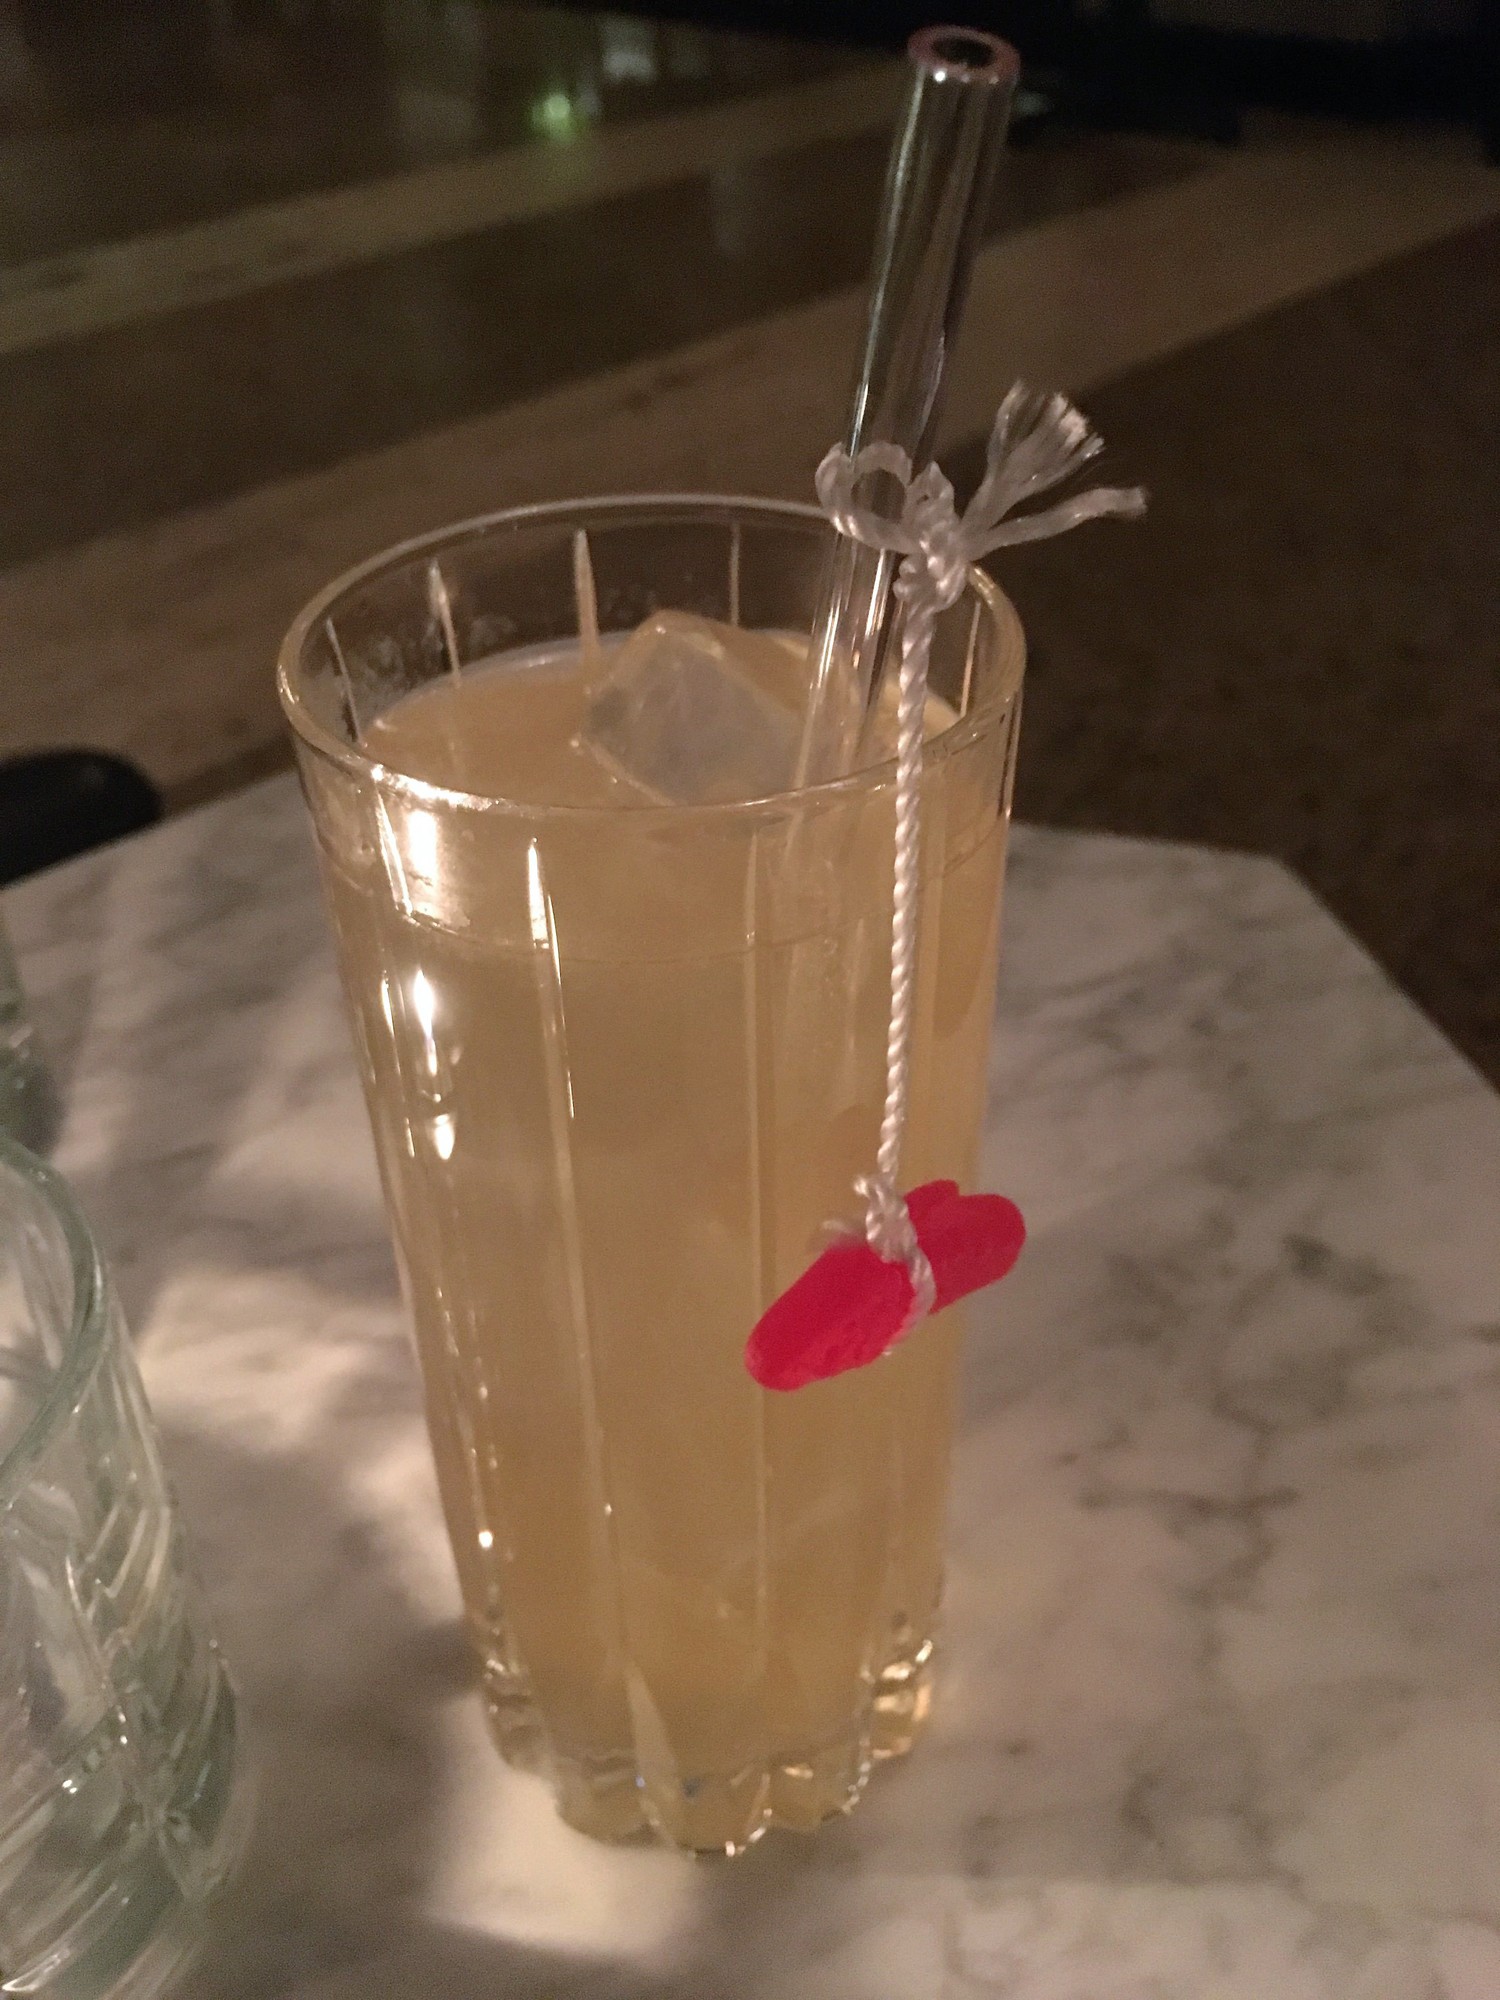 Fly Fishin’ & Finger Pickin’ is a cocktail that pays homage to former La Belle Vie bartender Adam Gorski at the new P.S. Steak lounge.